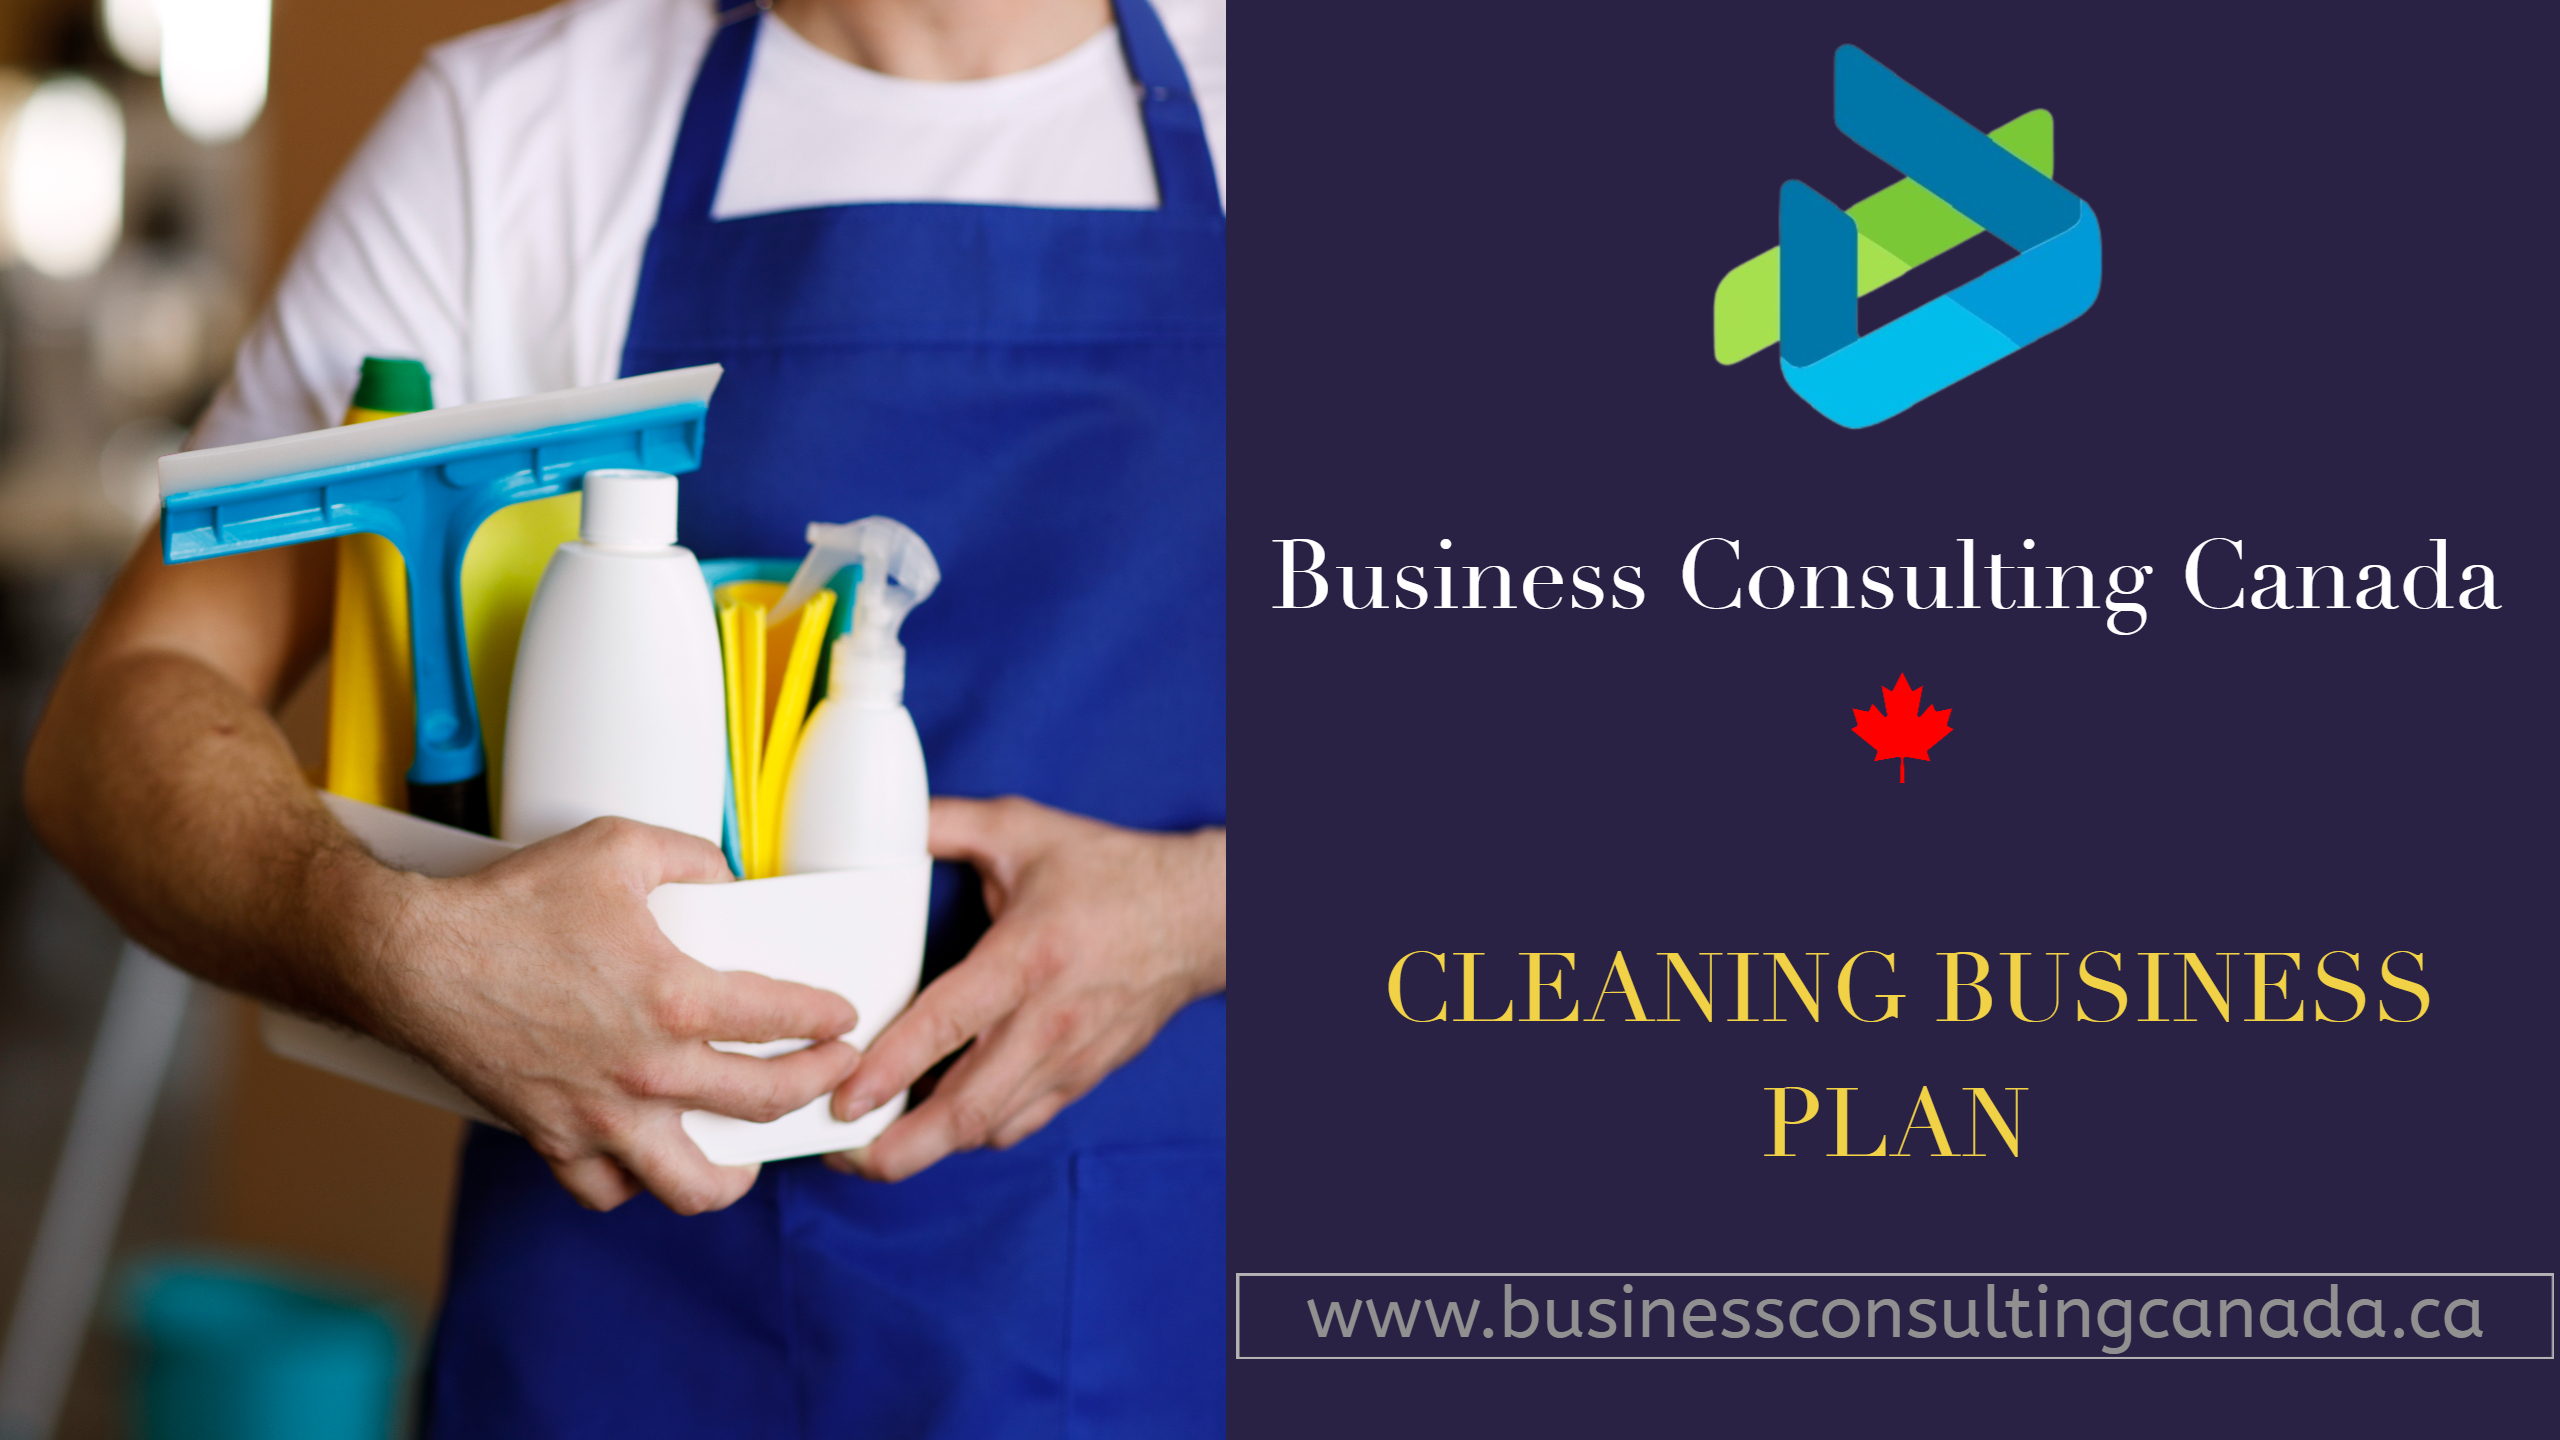 CLEANING BUSINESS PLAN